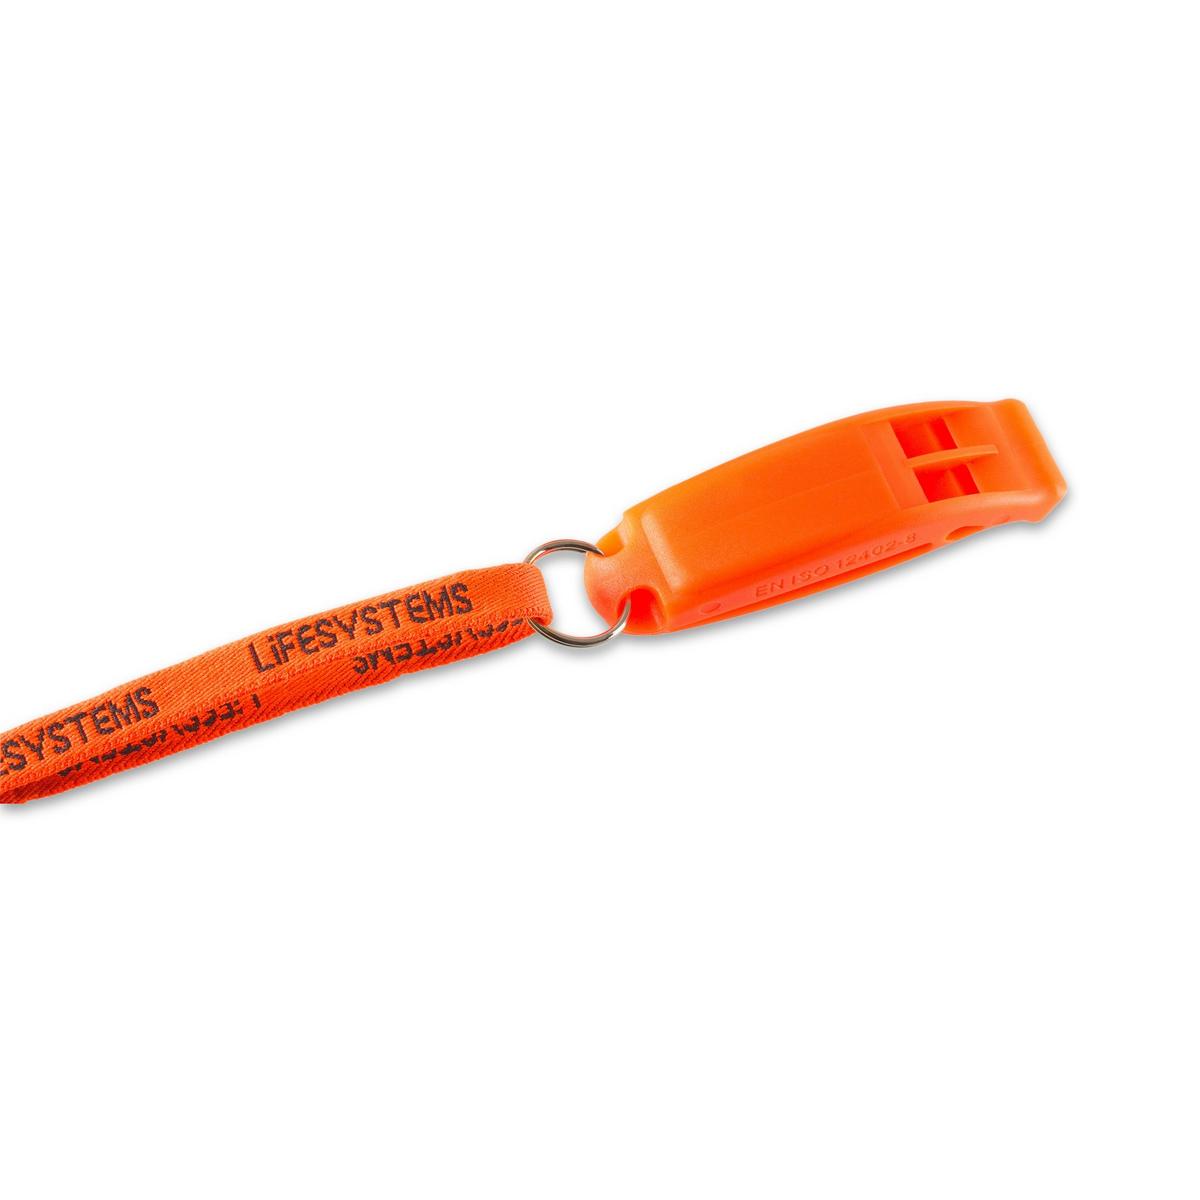 Lifesystems Safety Whistle New